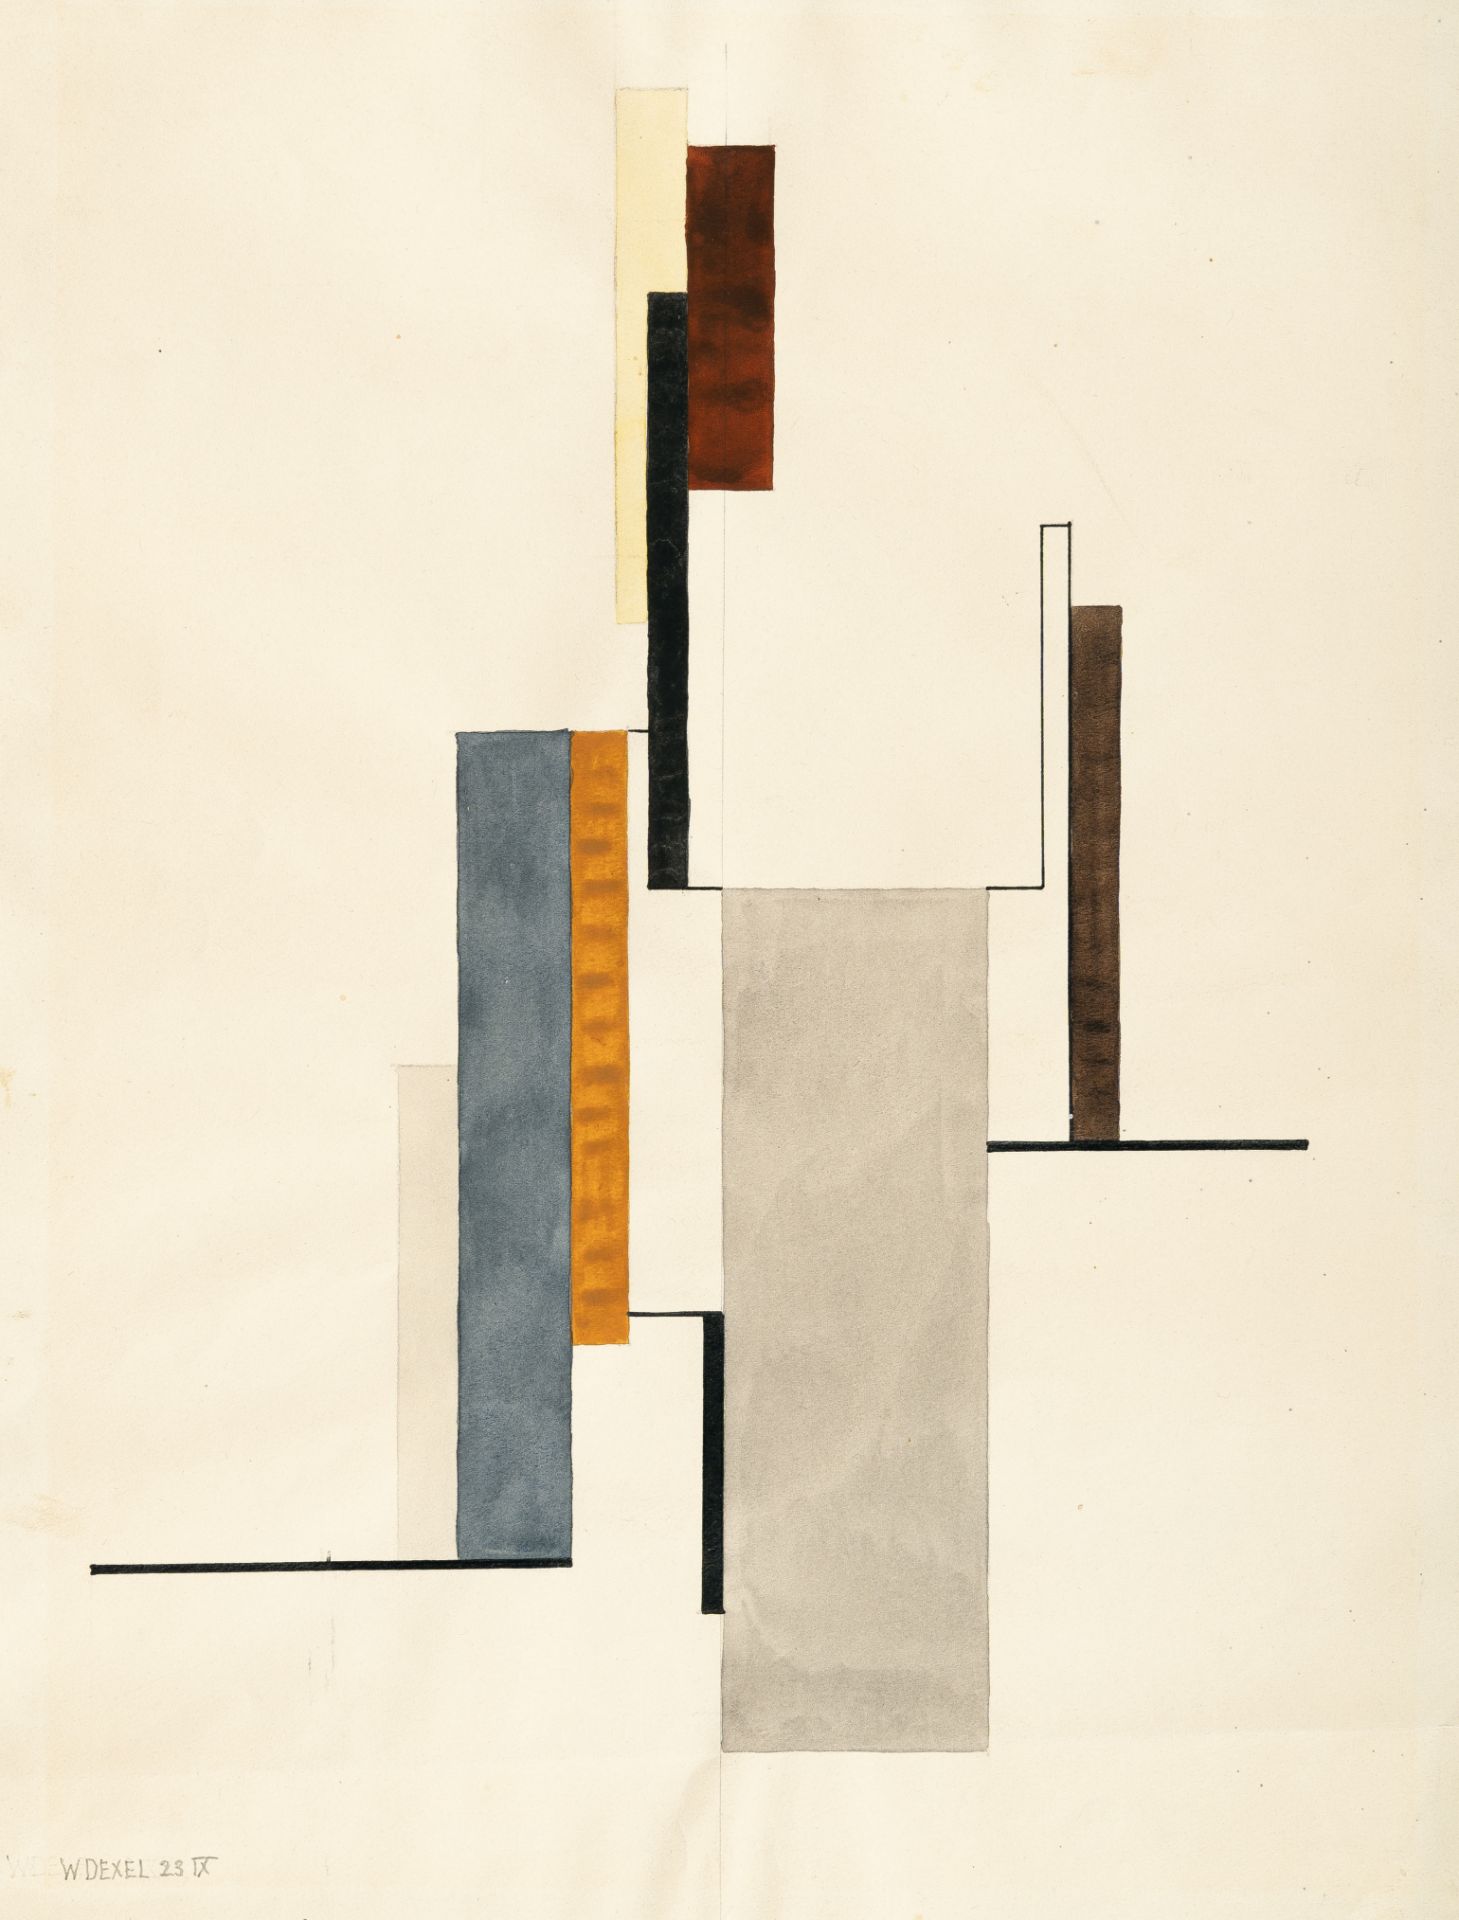 Walter Dexel, Figuration “Aqu-1923 IX”.Watercolour, Indian ink and Pencil on thin pale grey wove.